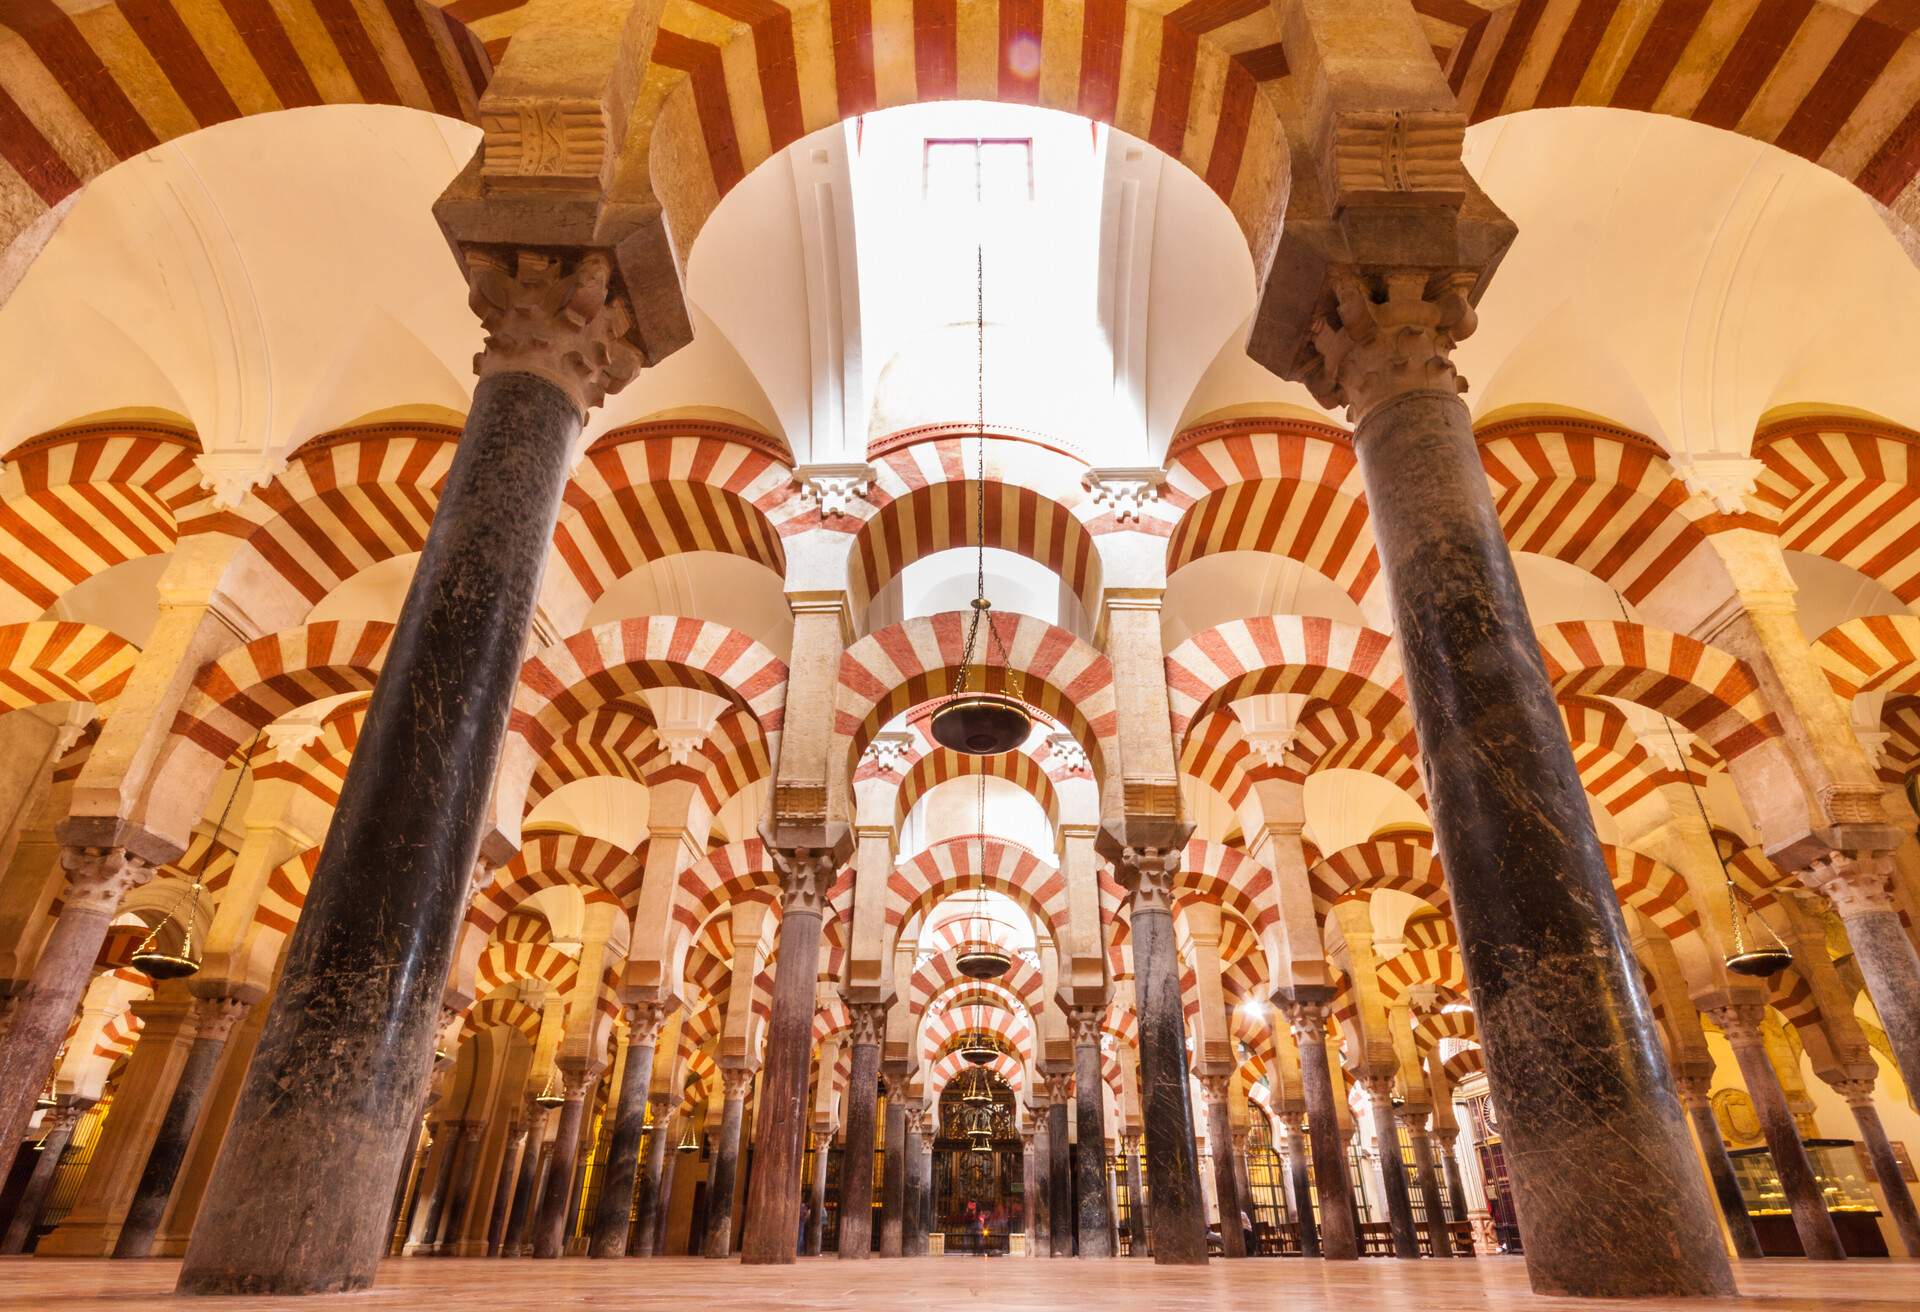 DEST_SPAIN_CORDOBA_CATHEDRAL-FORMER-GREAT-MOSQUE_UNESCO_shutterstock_137864276